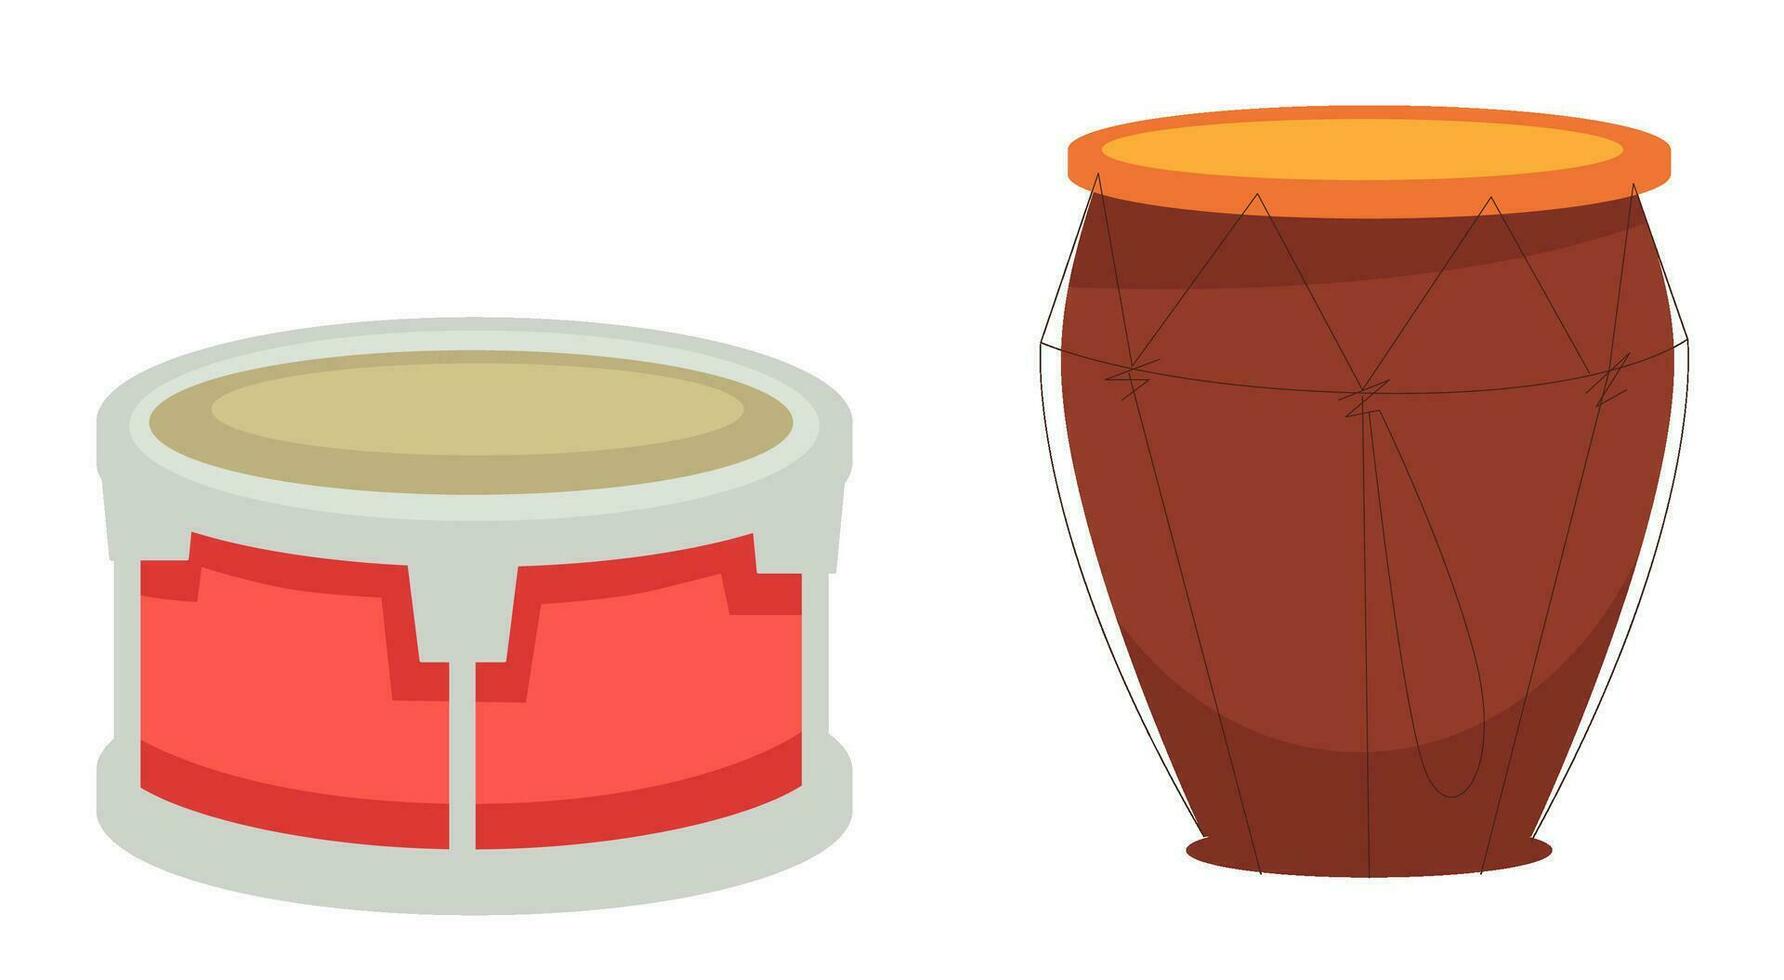 Percussion instruments for playing songs, drums vector